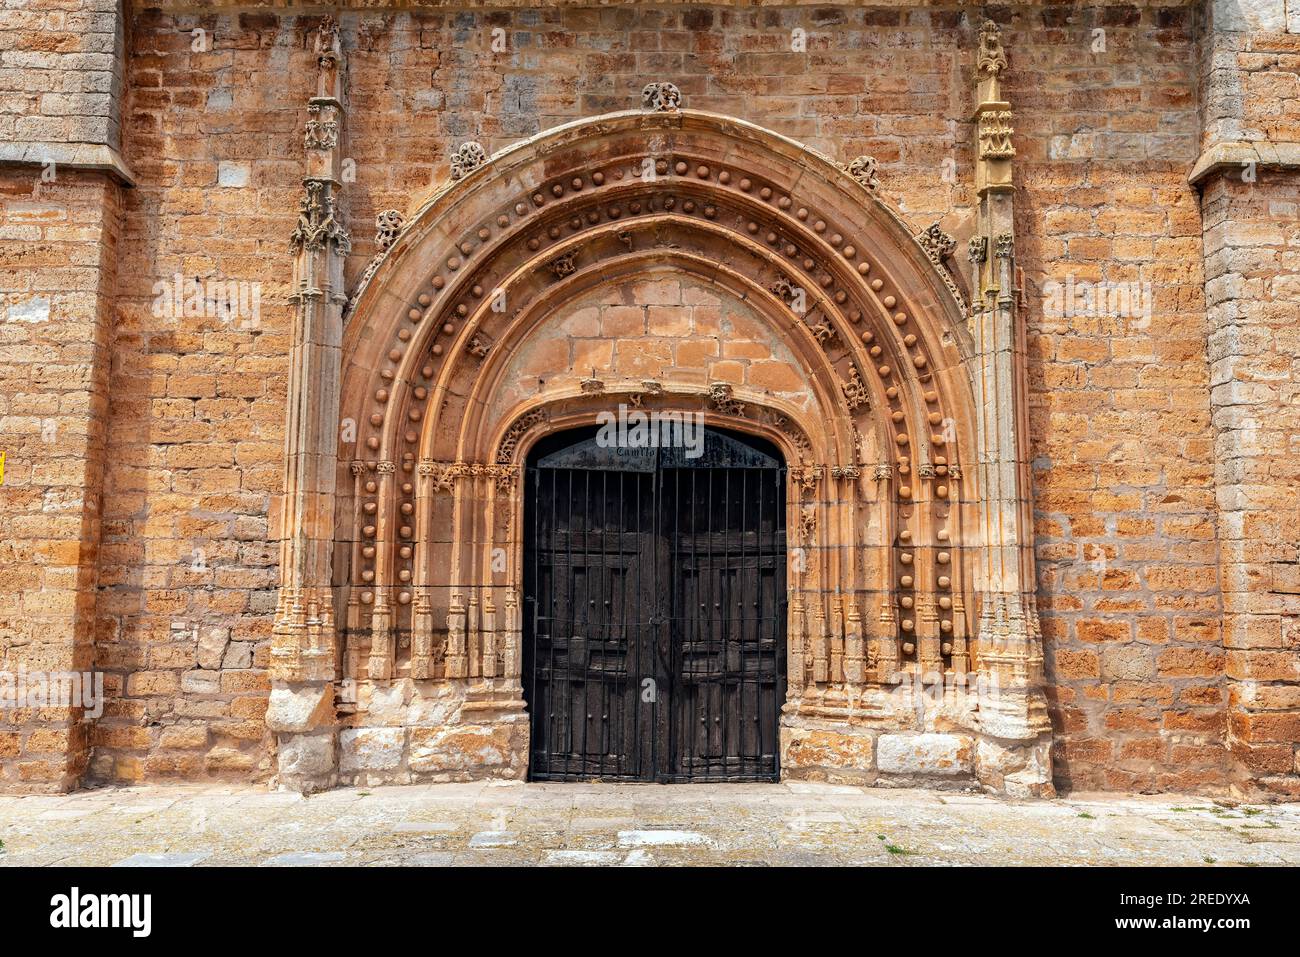 Portal of Nuestra Señora de la Asunción collegiate church (13th-18th century) rebuilt in 1440 in the Lombard-Gothic style, The church is placed in the Stock Photo